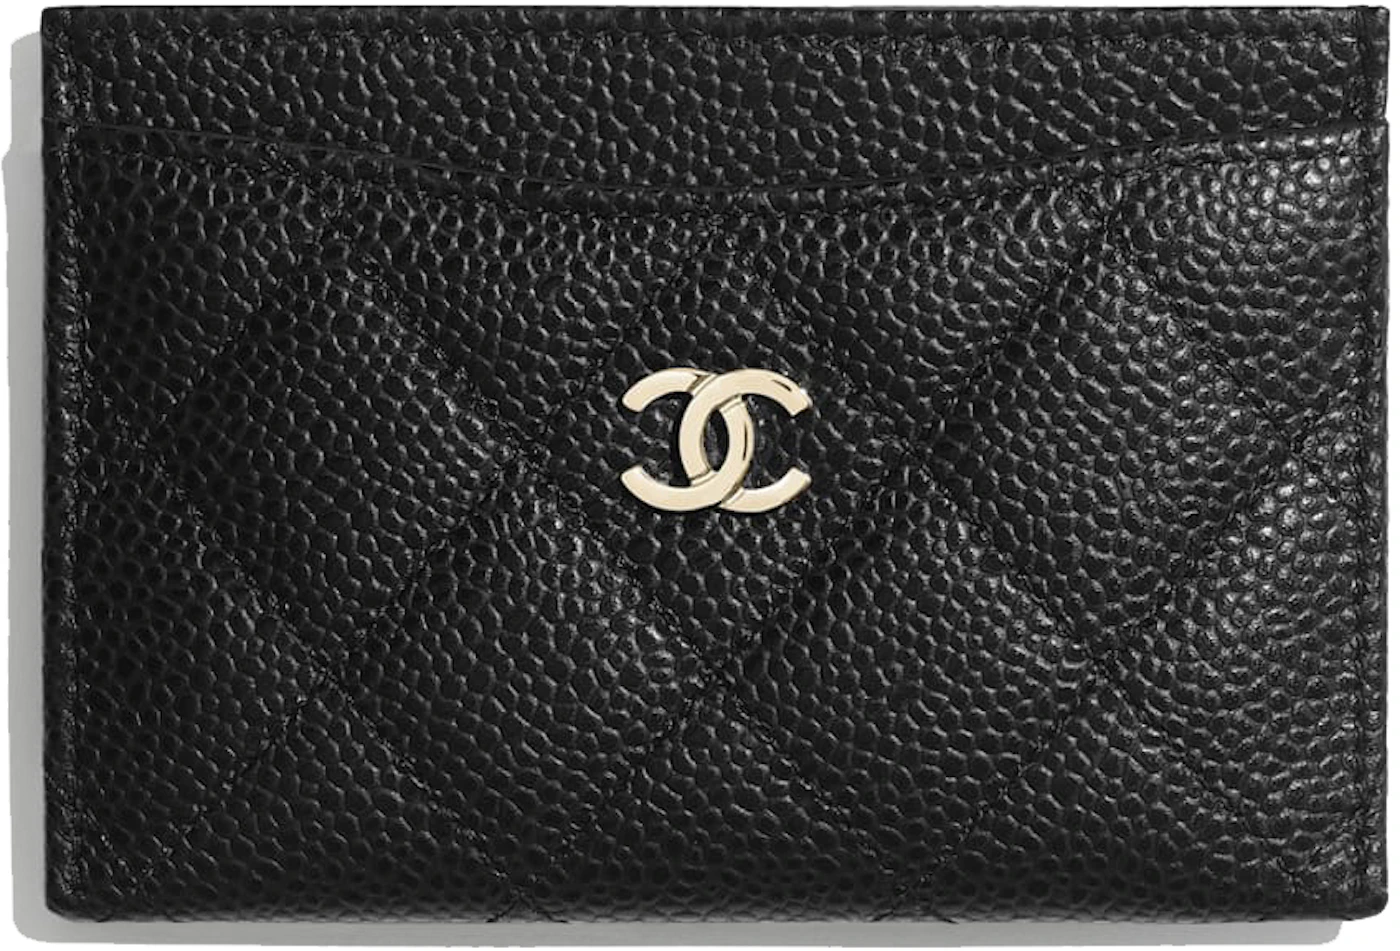 Chanel White Quilted Caviar Classic Card Holder, myGemma